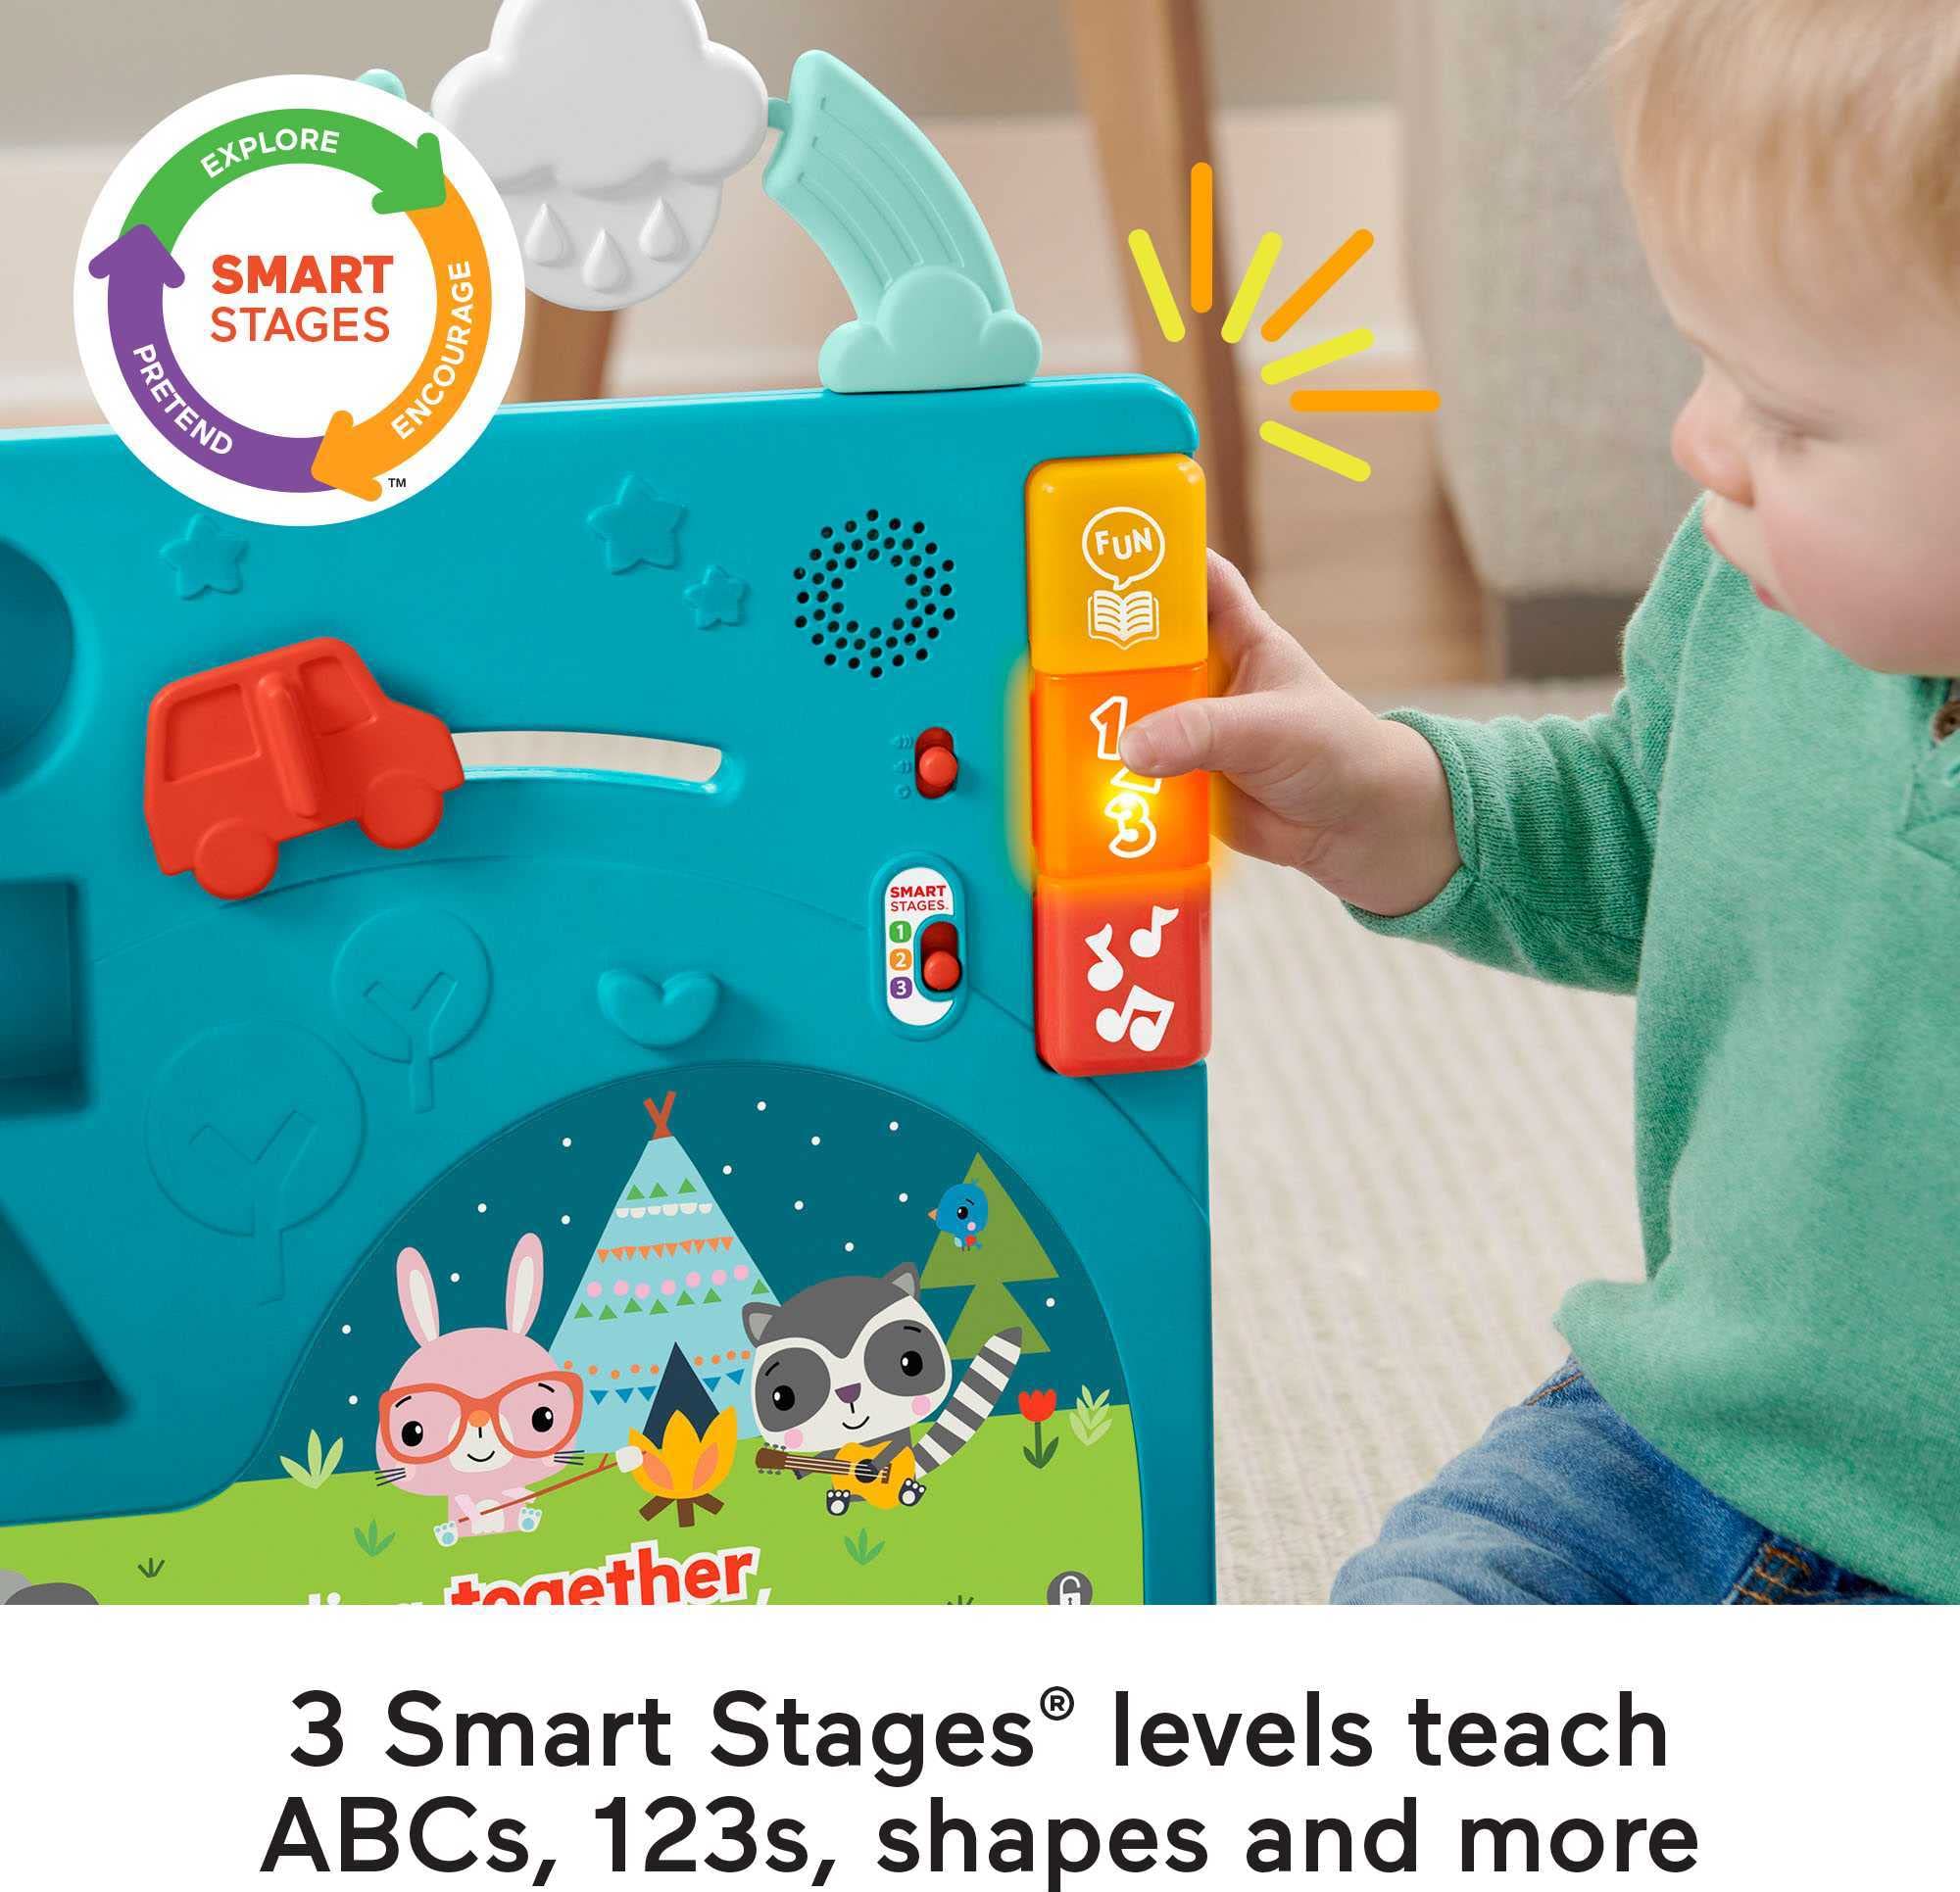 Fisher-Price Sit-to-Stand Giant Activity Book, Electronic Learning Toy and Activity Center for Infants and Toddlers Ages 6 Months to 3 Years